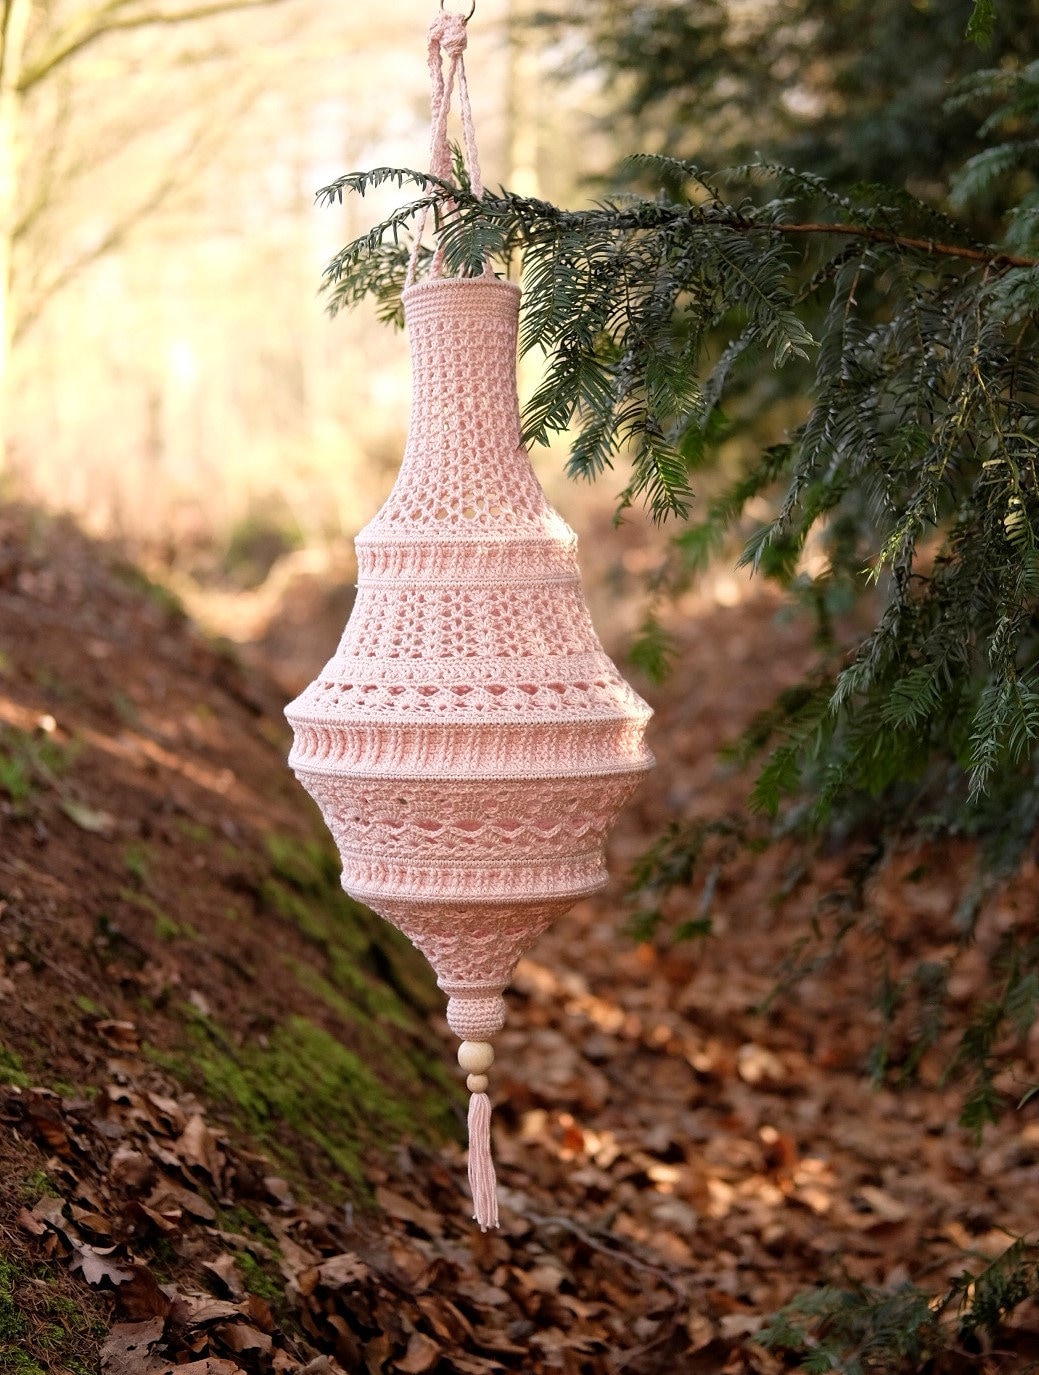 Crochet Pattern for Stunning Rustic Chandelier Lamp, Lampshade, Lantern,  Tested English and Dutch Crochet Pattern, Designed by Professionals 